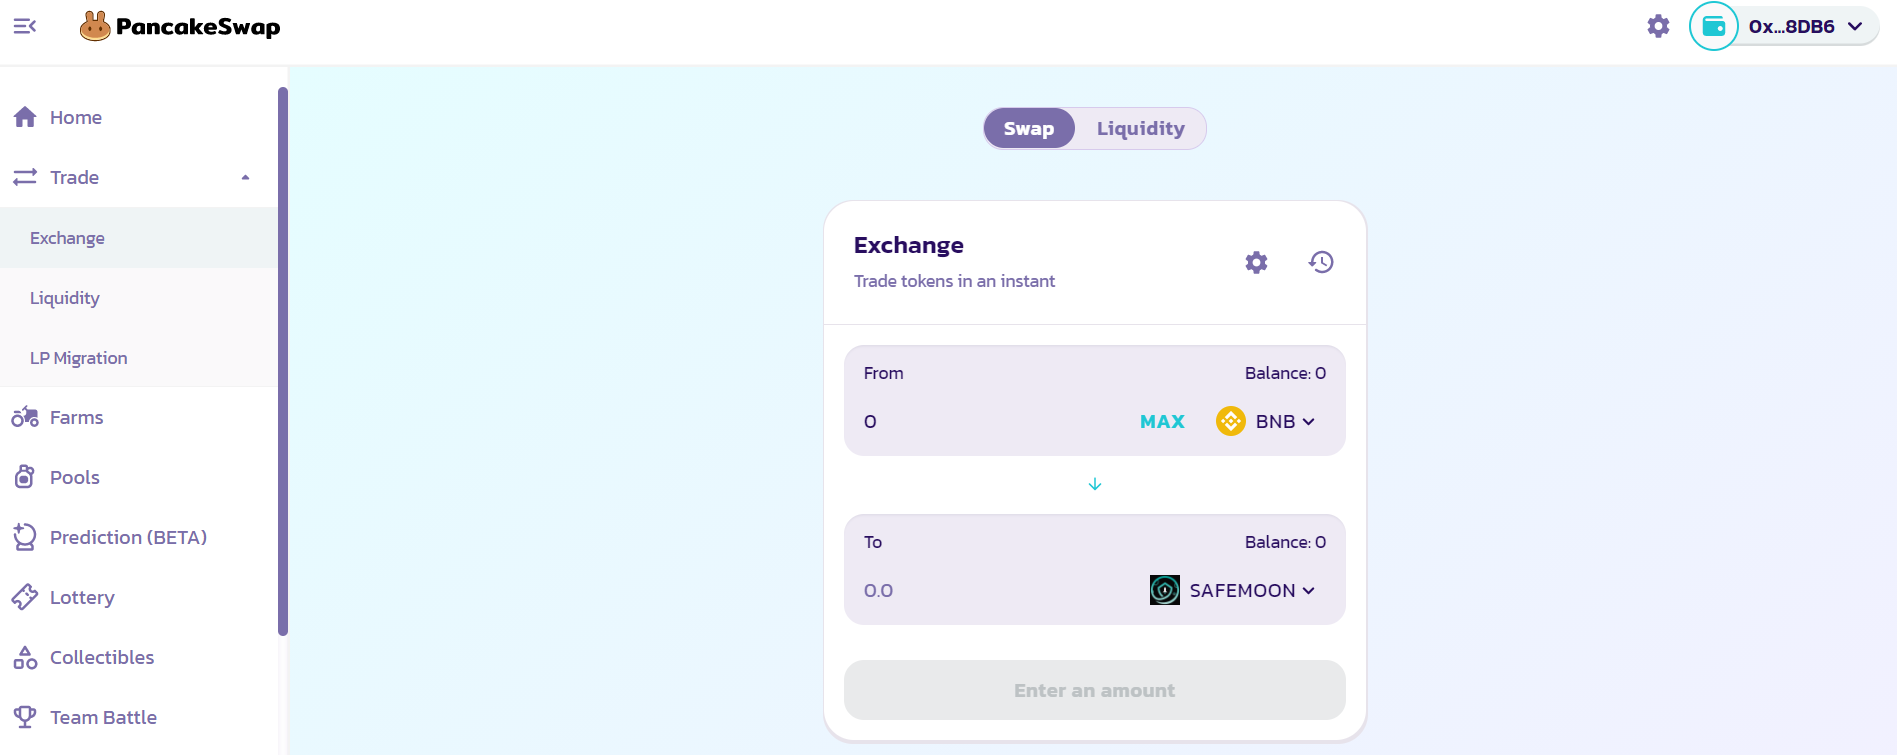 How to Buy SafeMoon in PancakeSwap? - A Detailed Guide